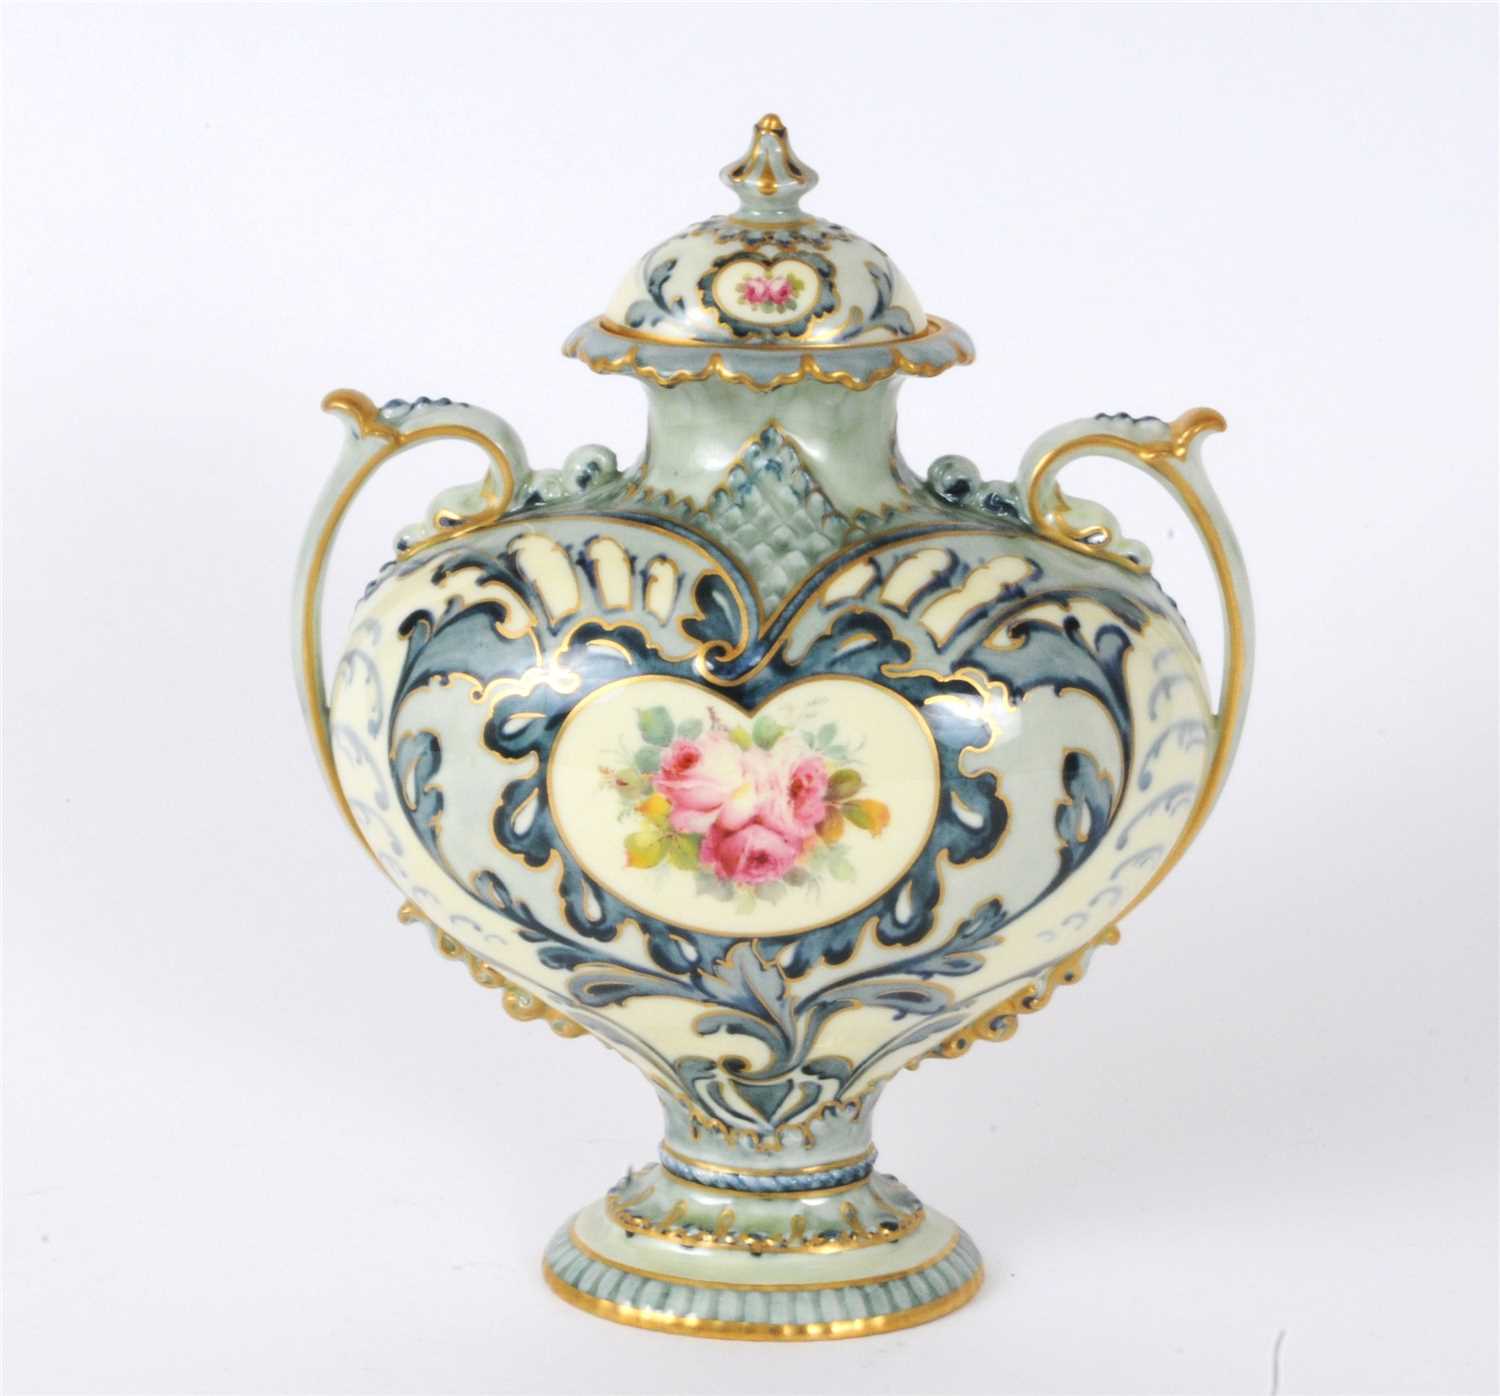 Lot 12 - Royal Crown Derby twin-handled vase and cover